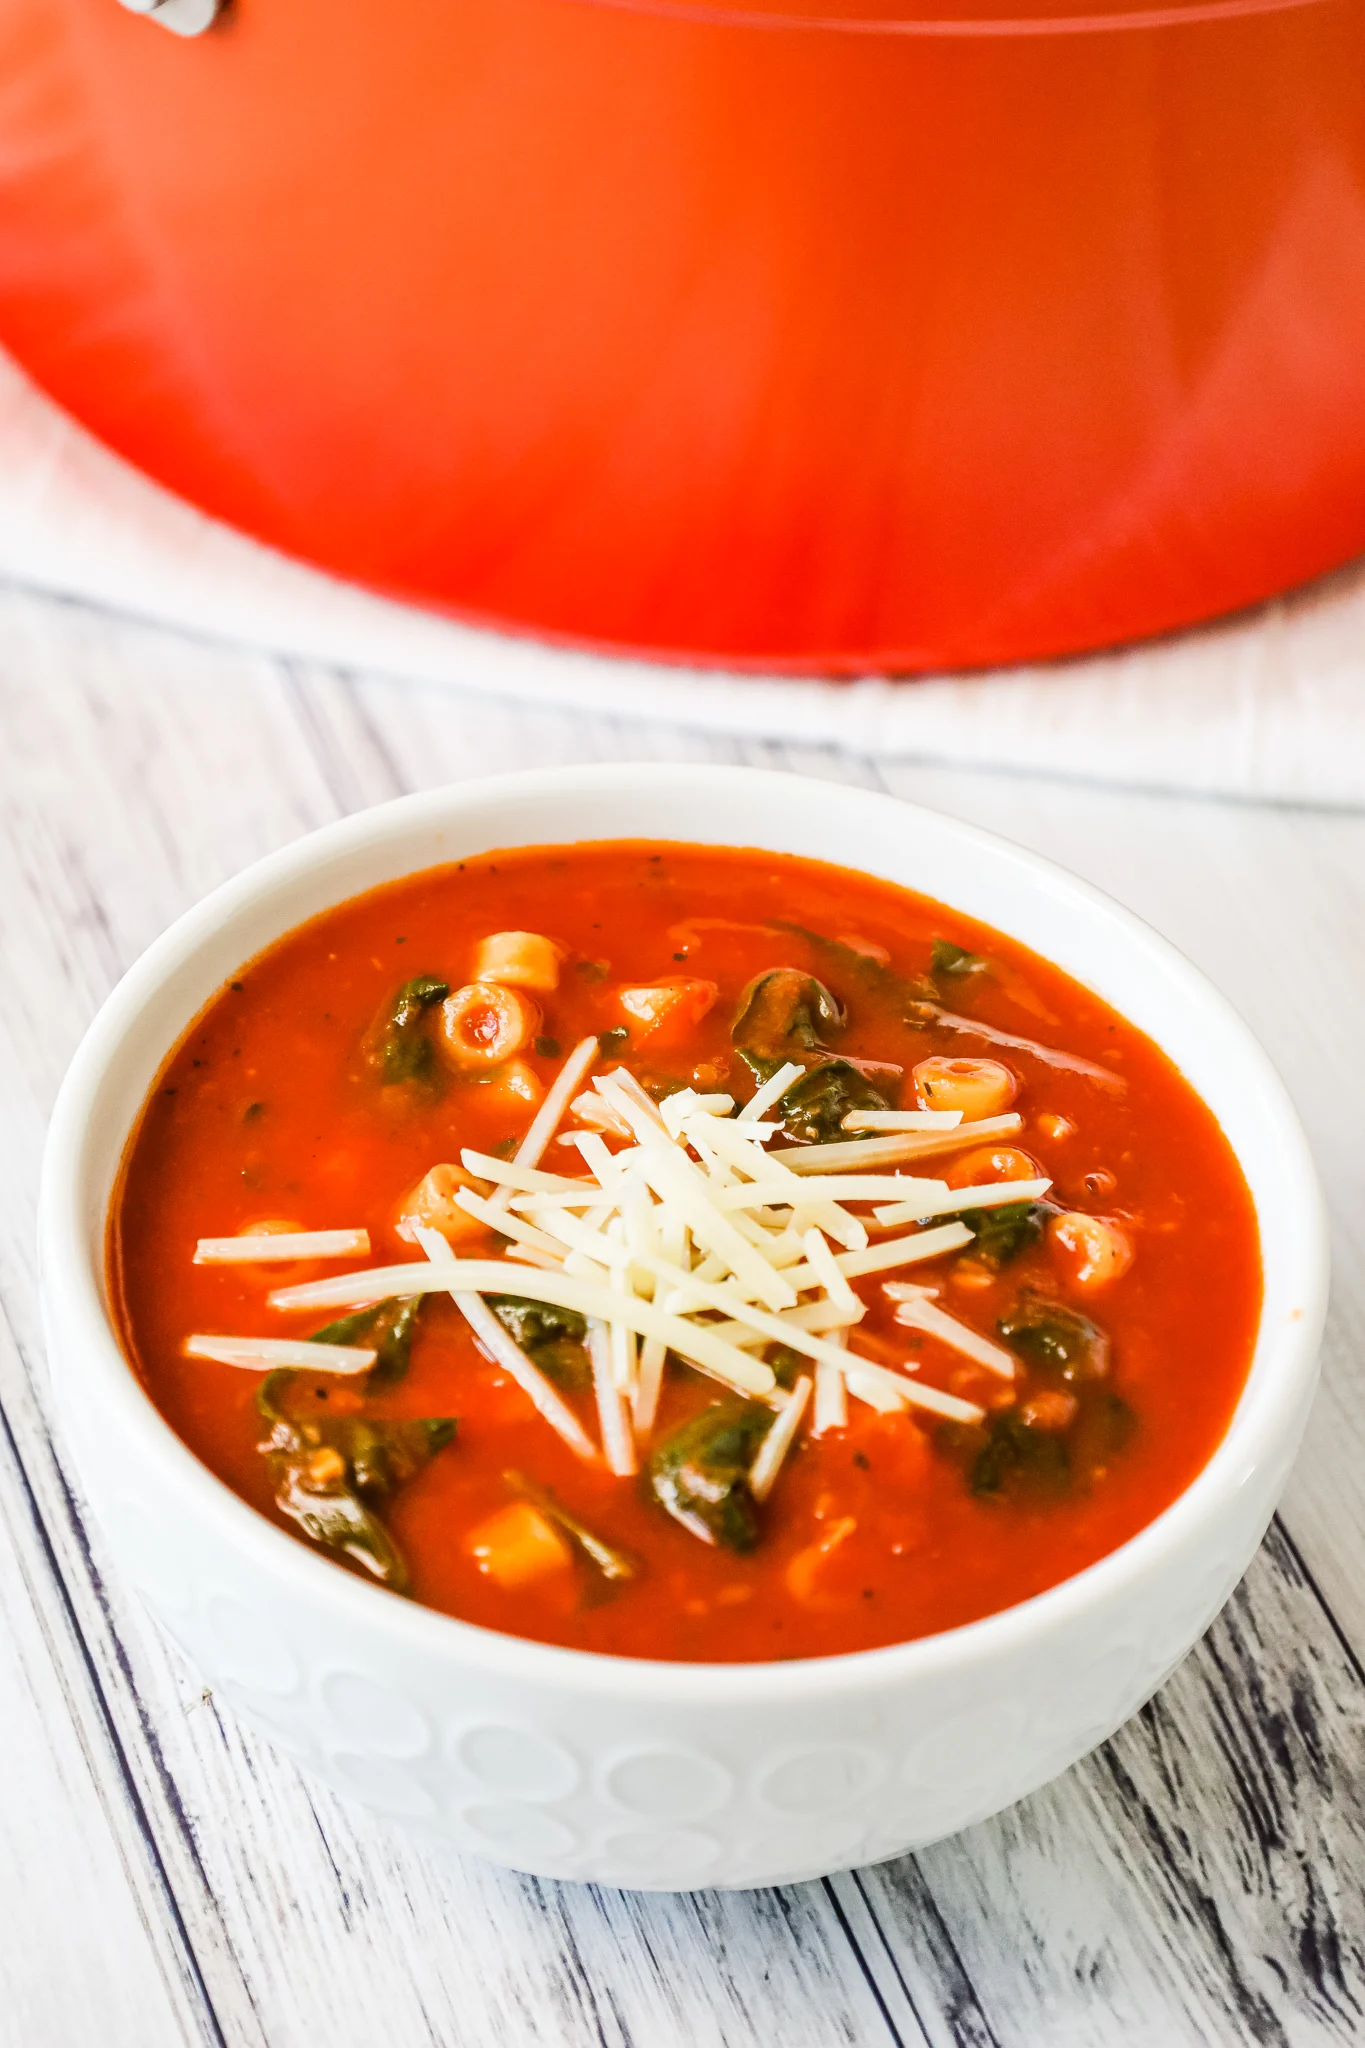 Tomato Florentine Soup is a hearty soup recipe made with crushed tomatoes and loaded with baby spinach and pasta.